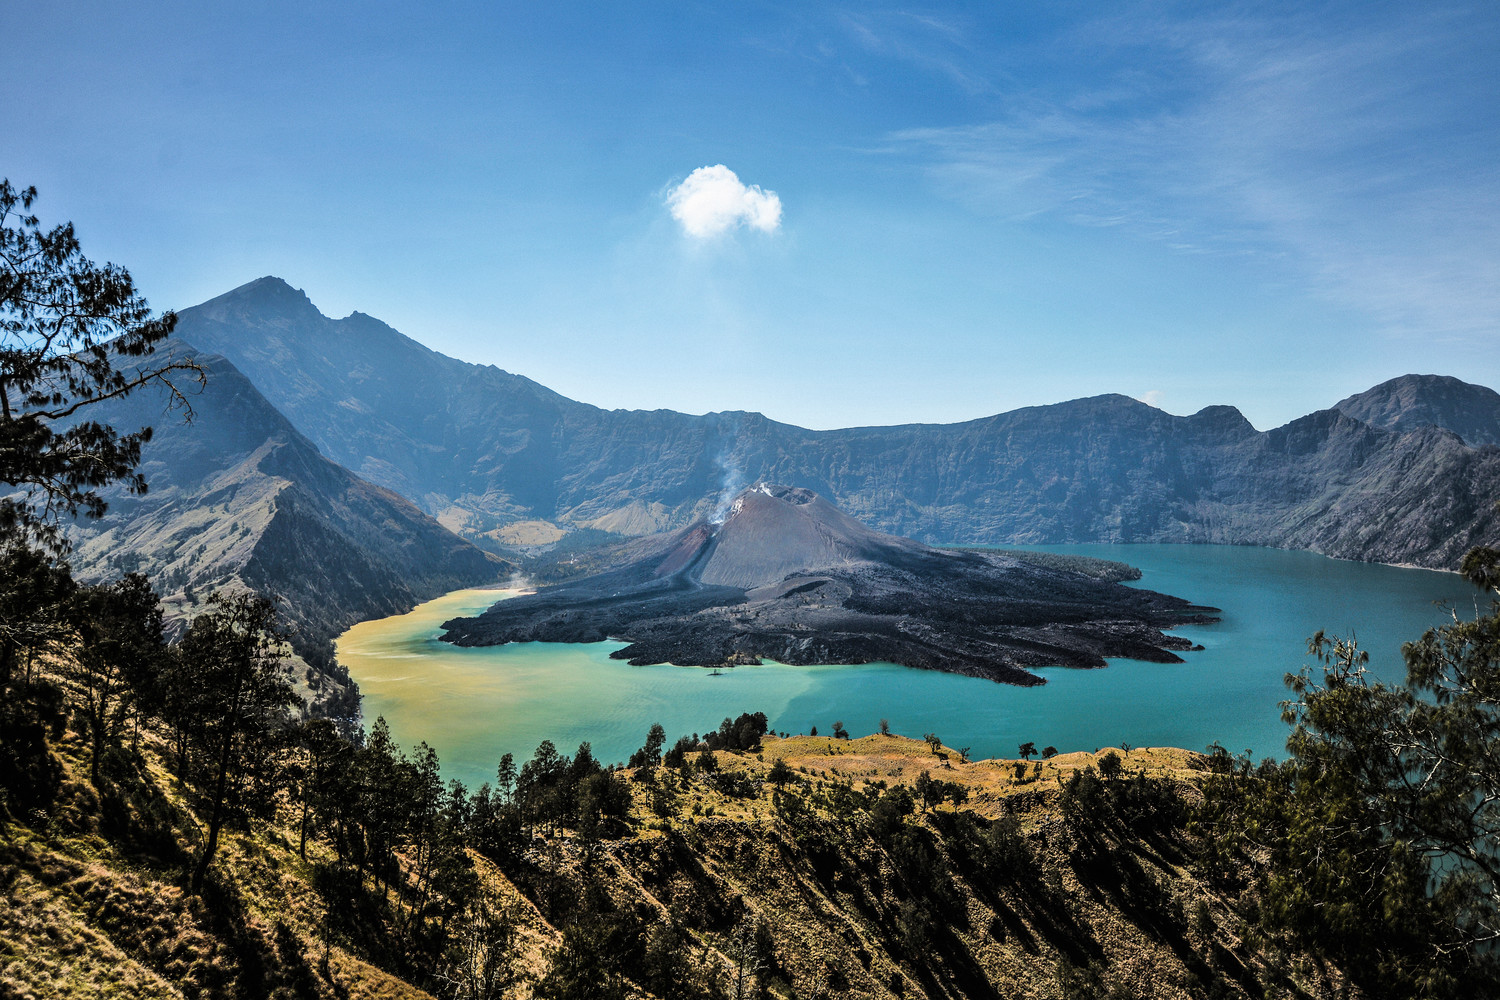  Rinjani  Volcano Lombok  Indonesia Photography by Varial